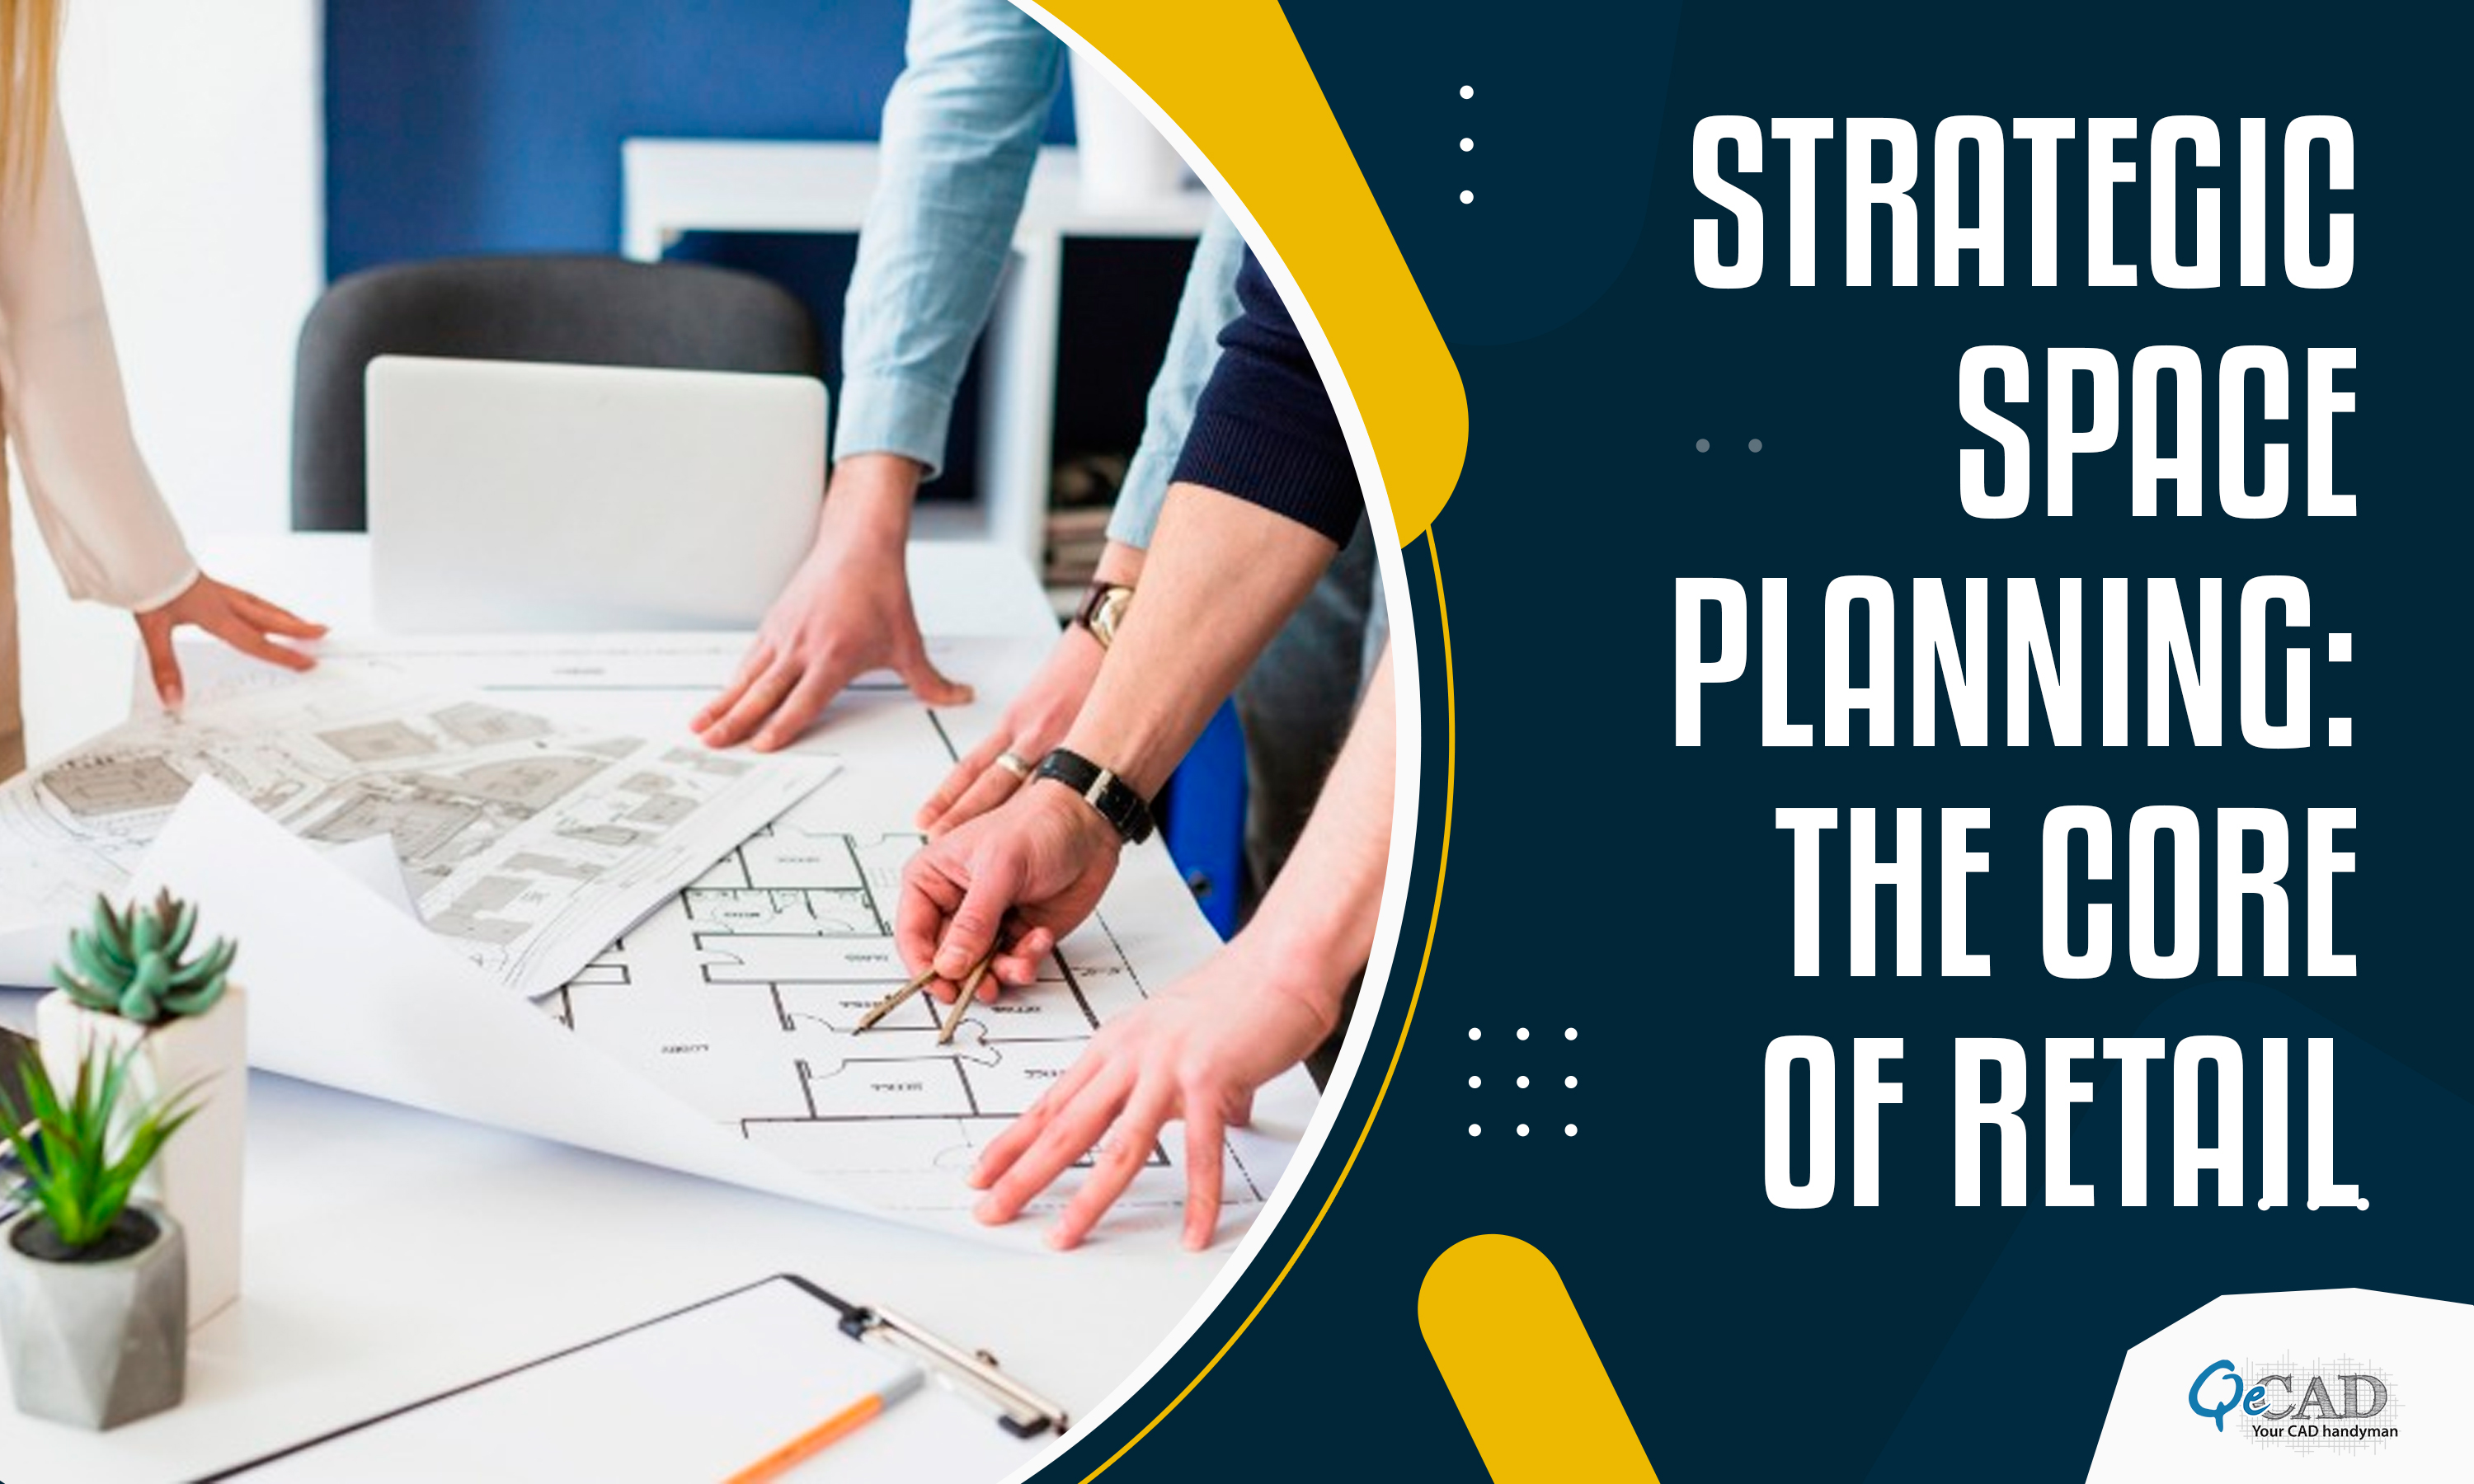 Strategic Space Planning: The Core of Retail